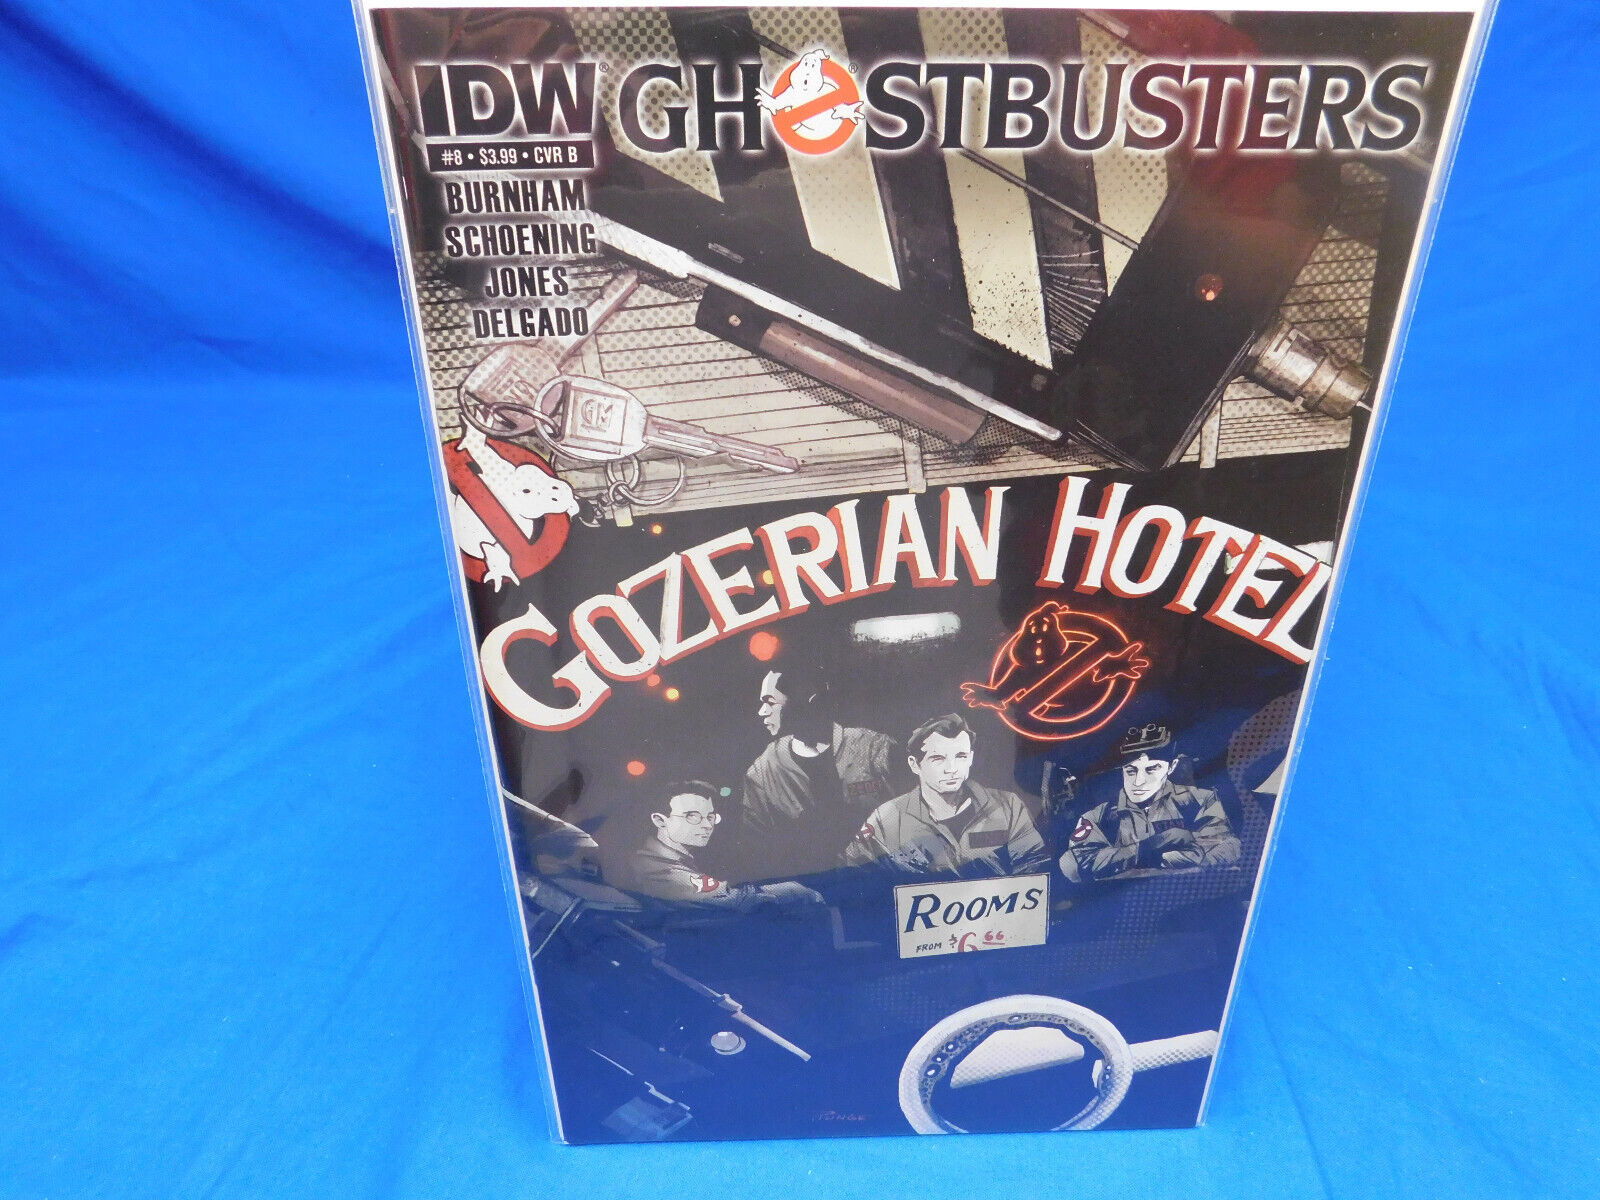 GHOSTBUSTERS #8 COVER B THE DOORS MORRISON HOTEL HOMAGE IDW COMICS 2012 VF/NM